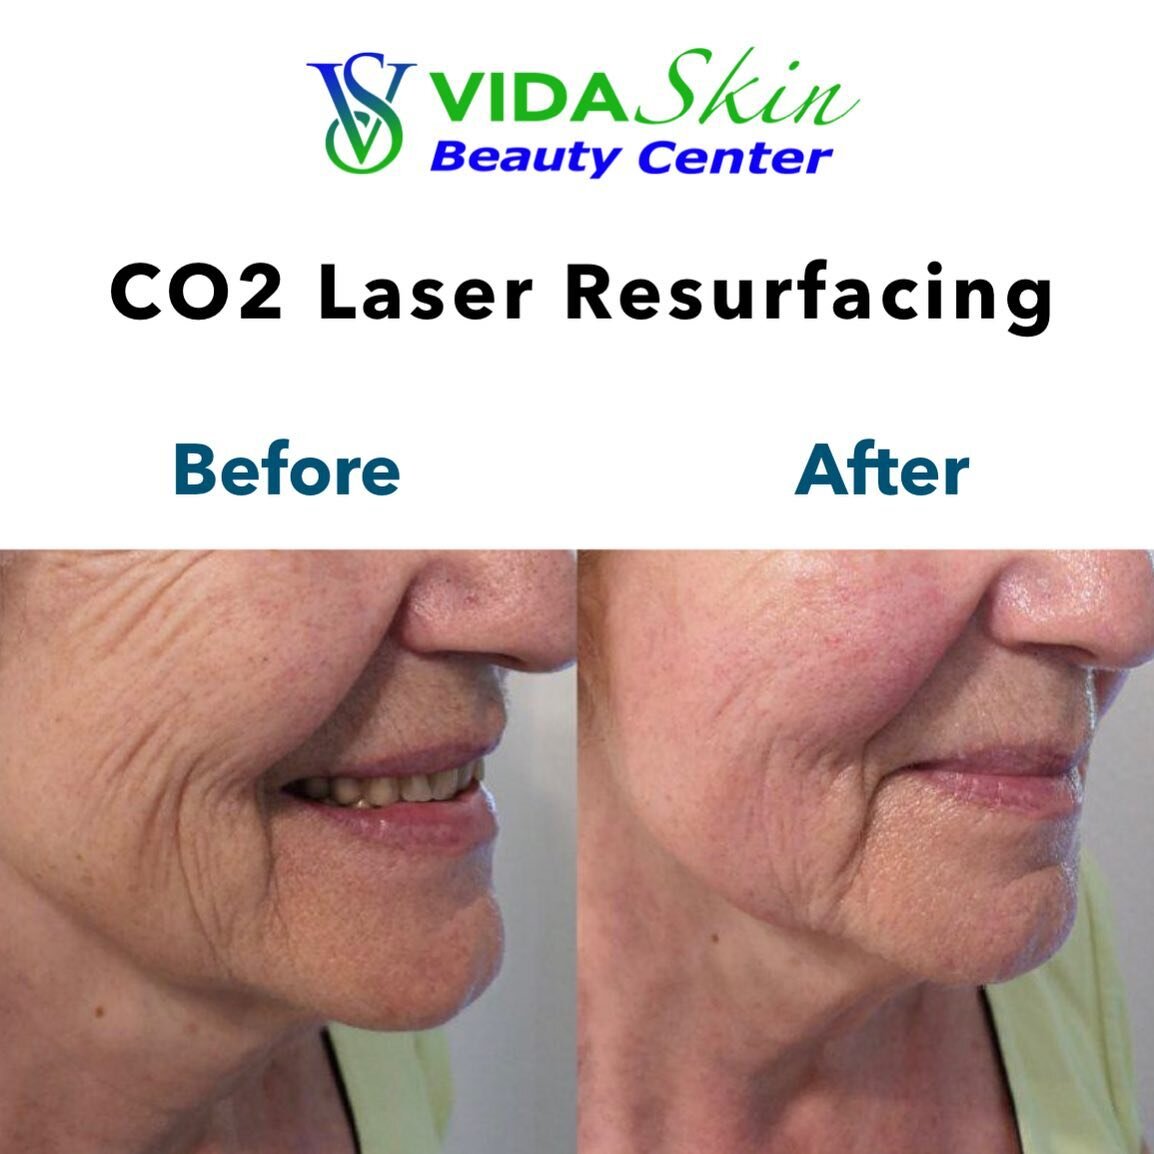 CO2 Laser Resurfacing and Rejuvenation!

👇
MULTIPLE BENEFITS:
&bull; Skin Tightening
&bull; Spot Removal
&bull; Wrinkle Removal
&bull; Collagen Creation
&bull; Pore Size Reduction
&bull; Learn more, link in bio.
👇
BOOK YOUR CONSULTATION!

#co2laser